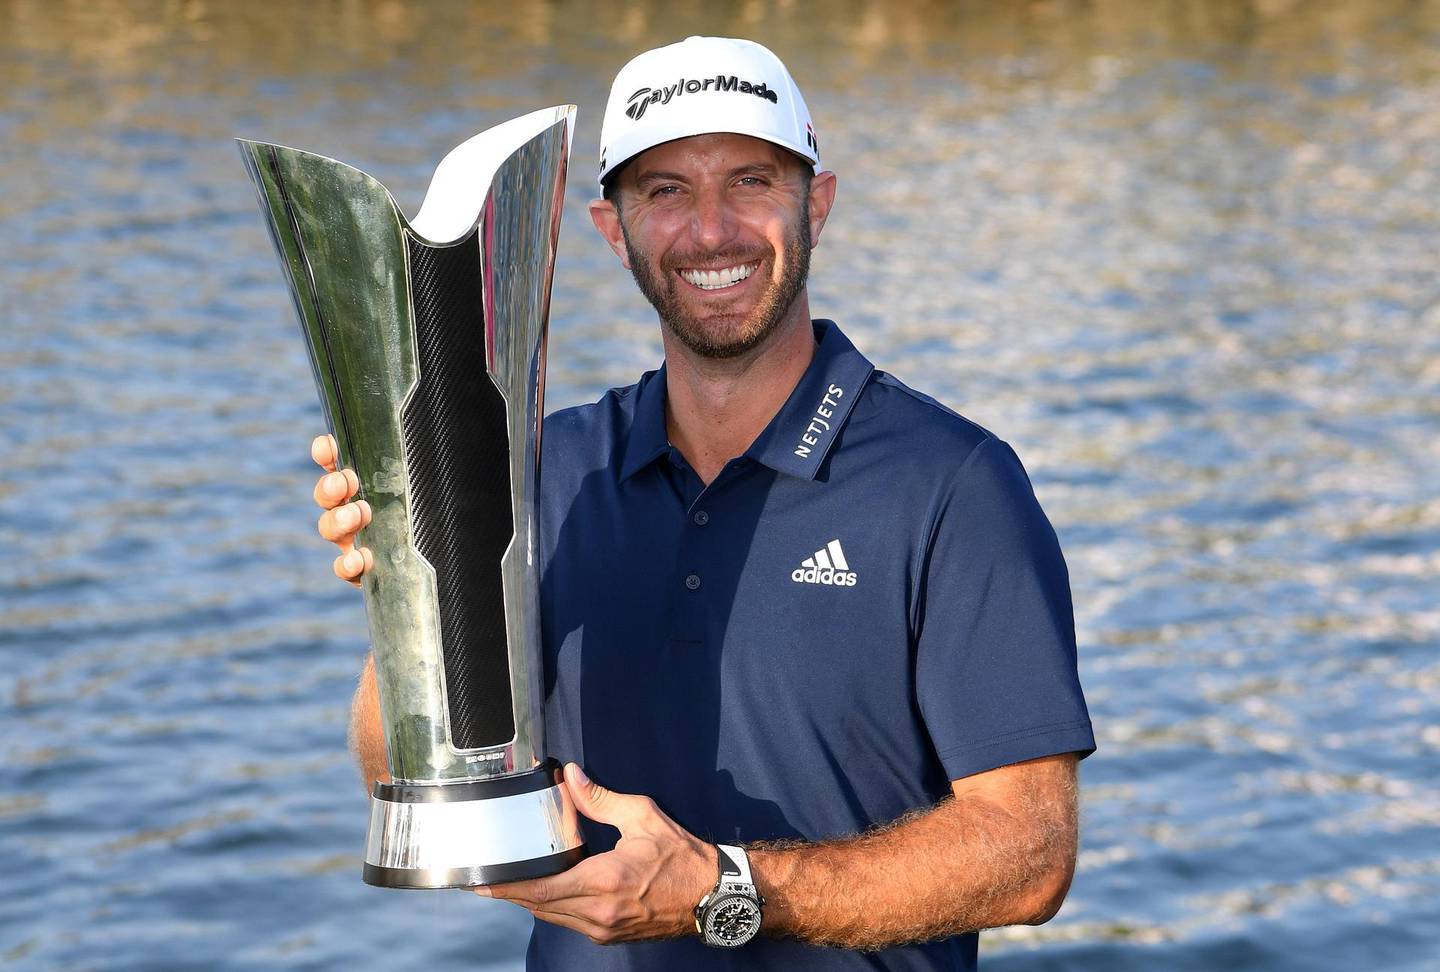 KING ABDULLAH ECONOMIC CITY, SAUDI ARABIA - FEBRUARY 03: Dustin Johnson of The United States celebrates with the trophy after the final round of the Saudi International at the Royal Greens Golf & Country Club on February 03, 2019 in King Abdullah Economic City, Saudi Arabia.  (Photo by Ross Kinnaird/Getty Images)